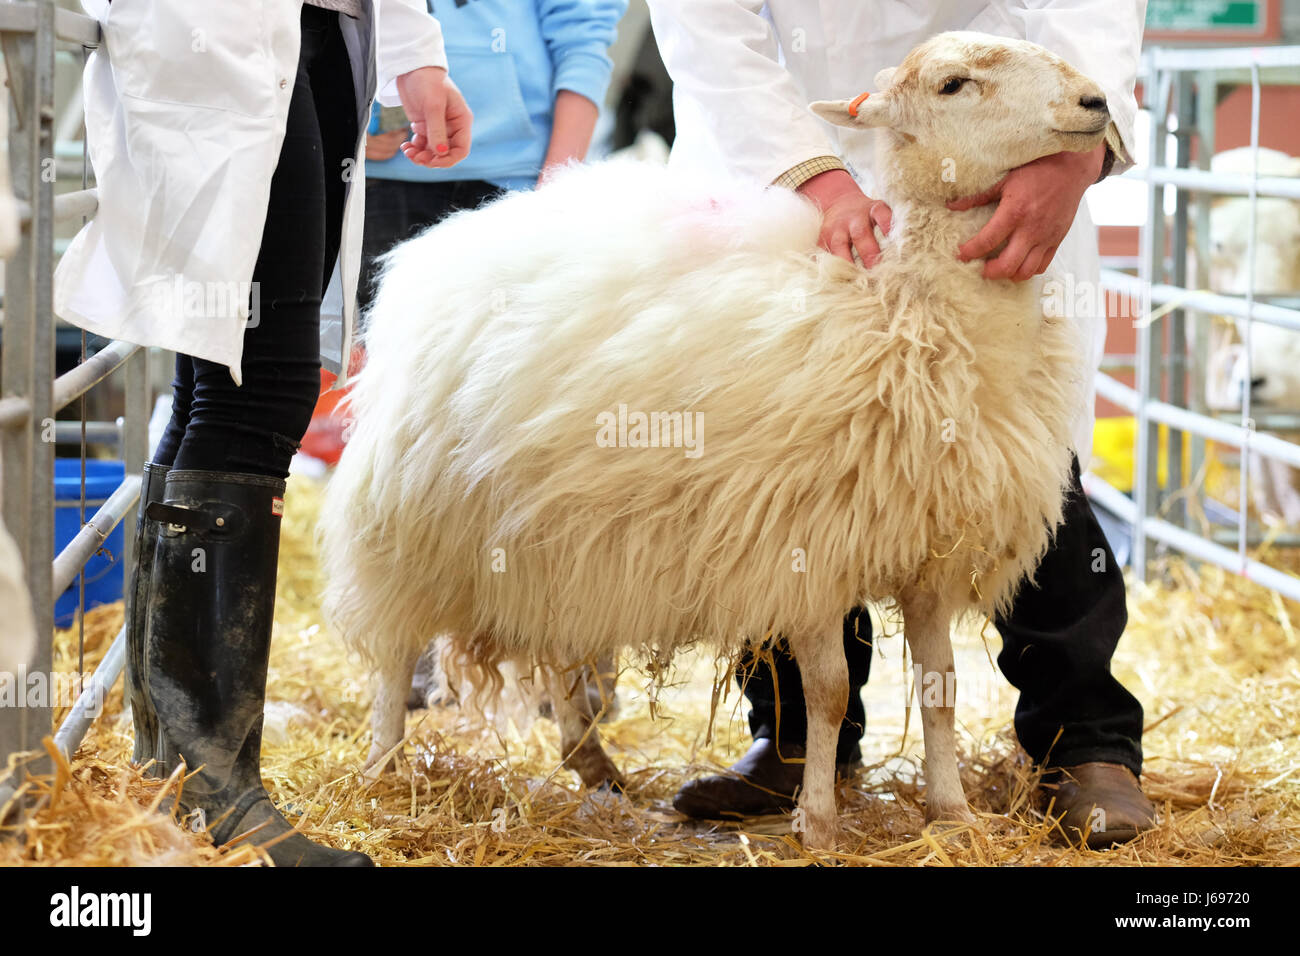 Royal Welsh Spring Festival, Builth Wells, Powys, Wales - May 2017 - Final preparation just before entering the show ring at the Royal Welsh Spring Festival. Photo Steven May / Alamy Live News Stock Photo